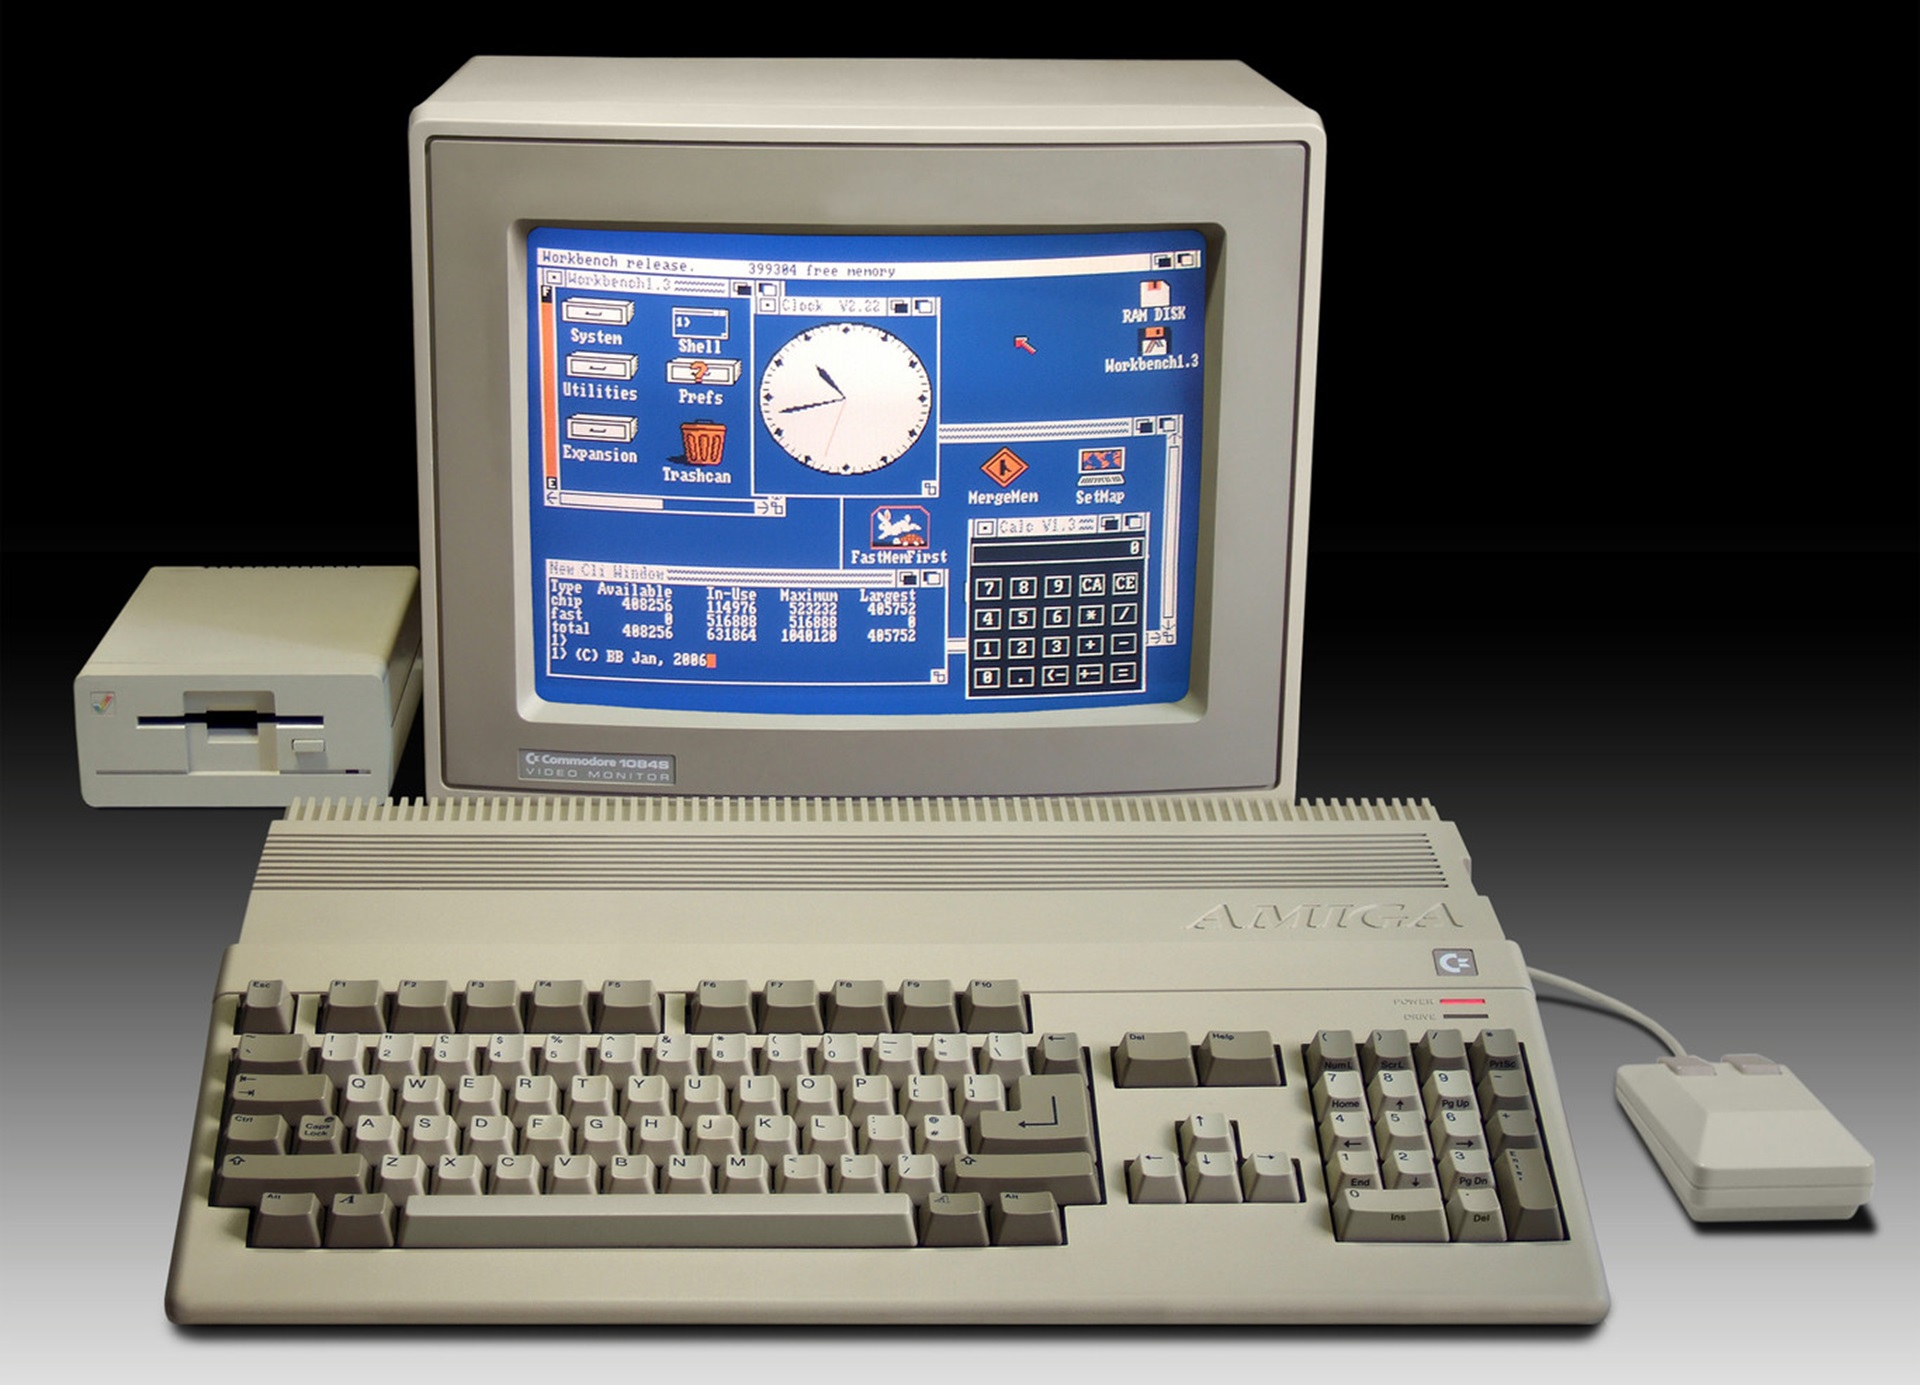 Commodore Amiga with a mouse and floppy disk reader